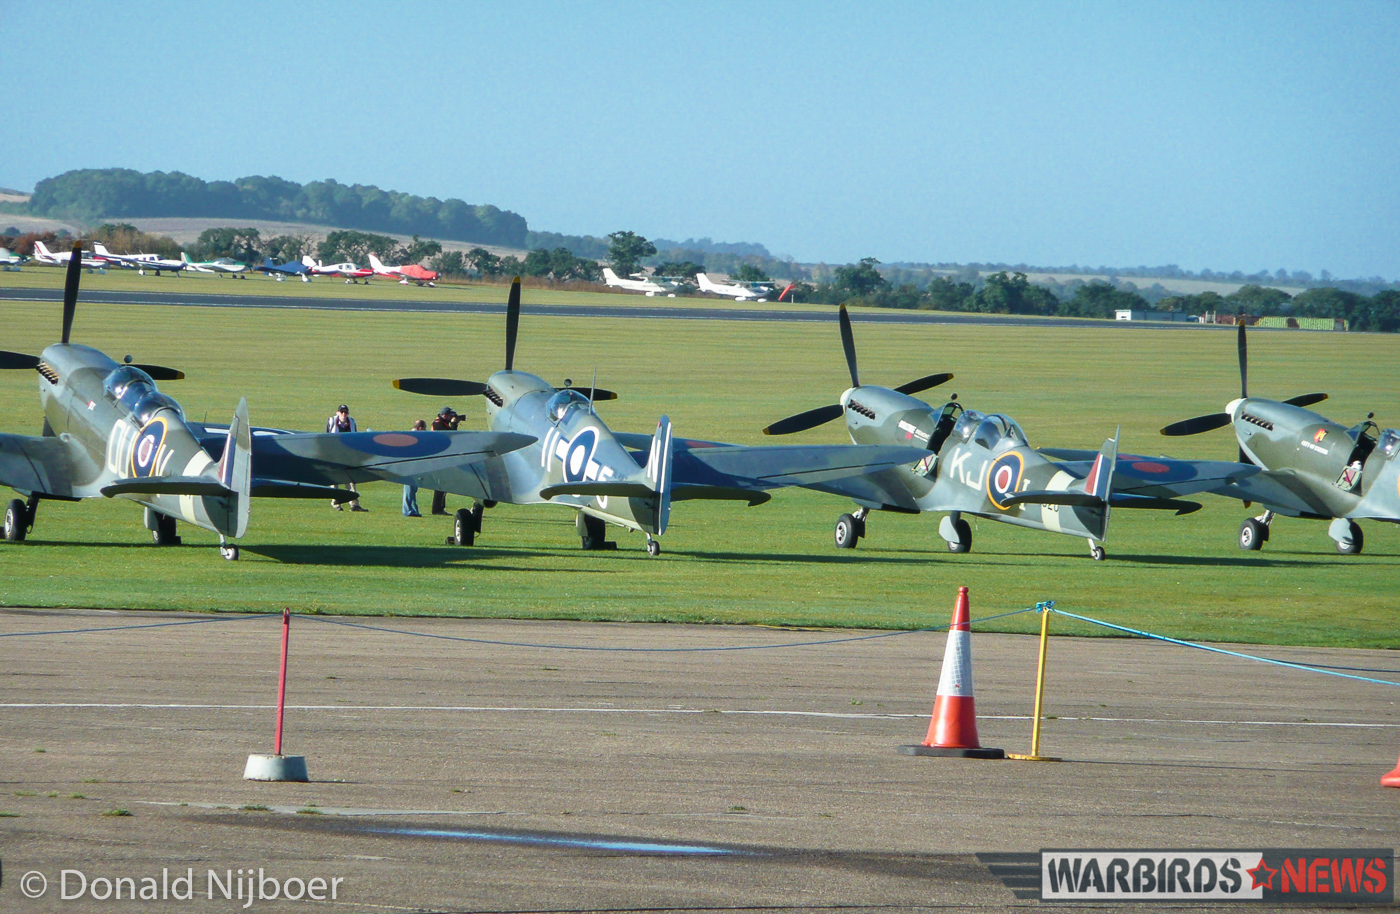 Four of the fourteen Spitfire variants which took part in the massed flypast near the end of the show. Here we see, from the left, a pair of Spitfire Tr.9 two seat trainers flanking a rare Seafire LF.III. Spitfire Mk.IX RR232 'City of Exeter' sits at the far right. (photo by Donald Nijboer)